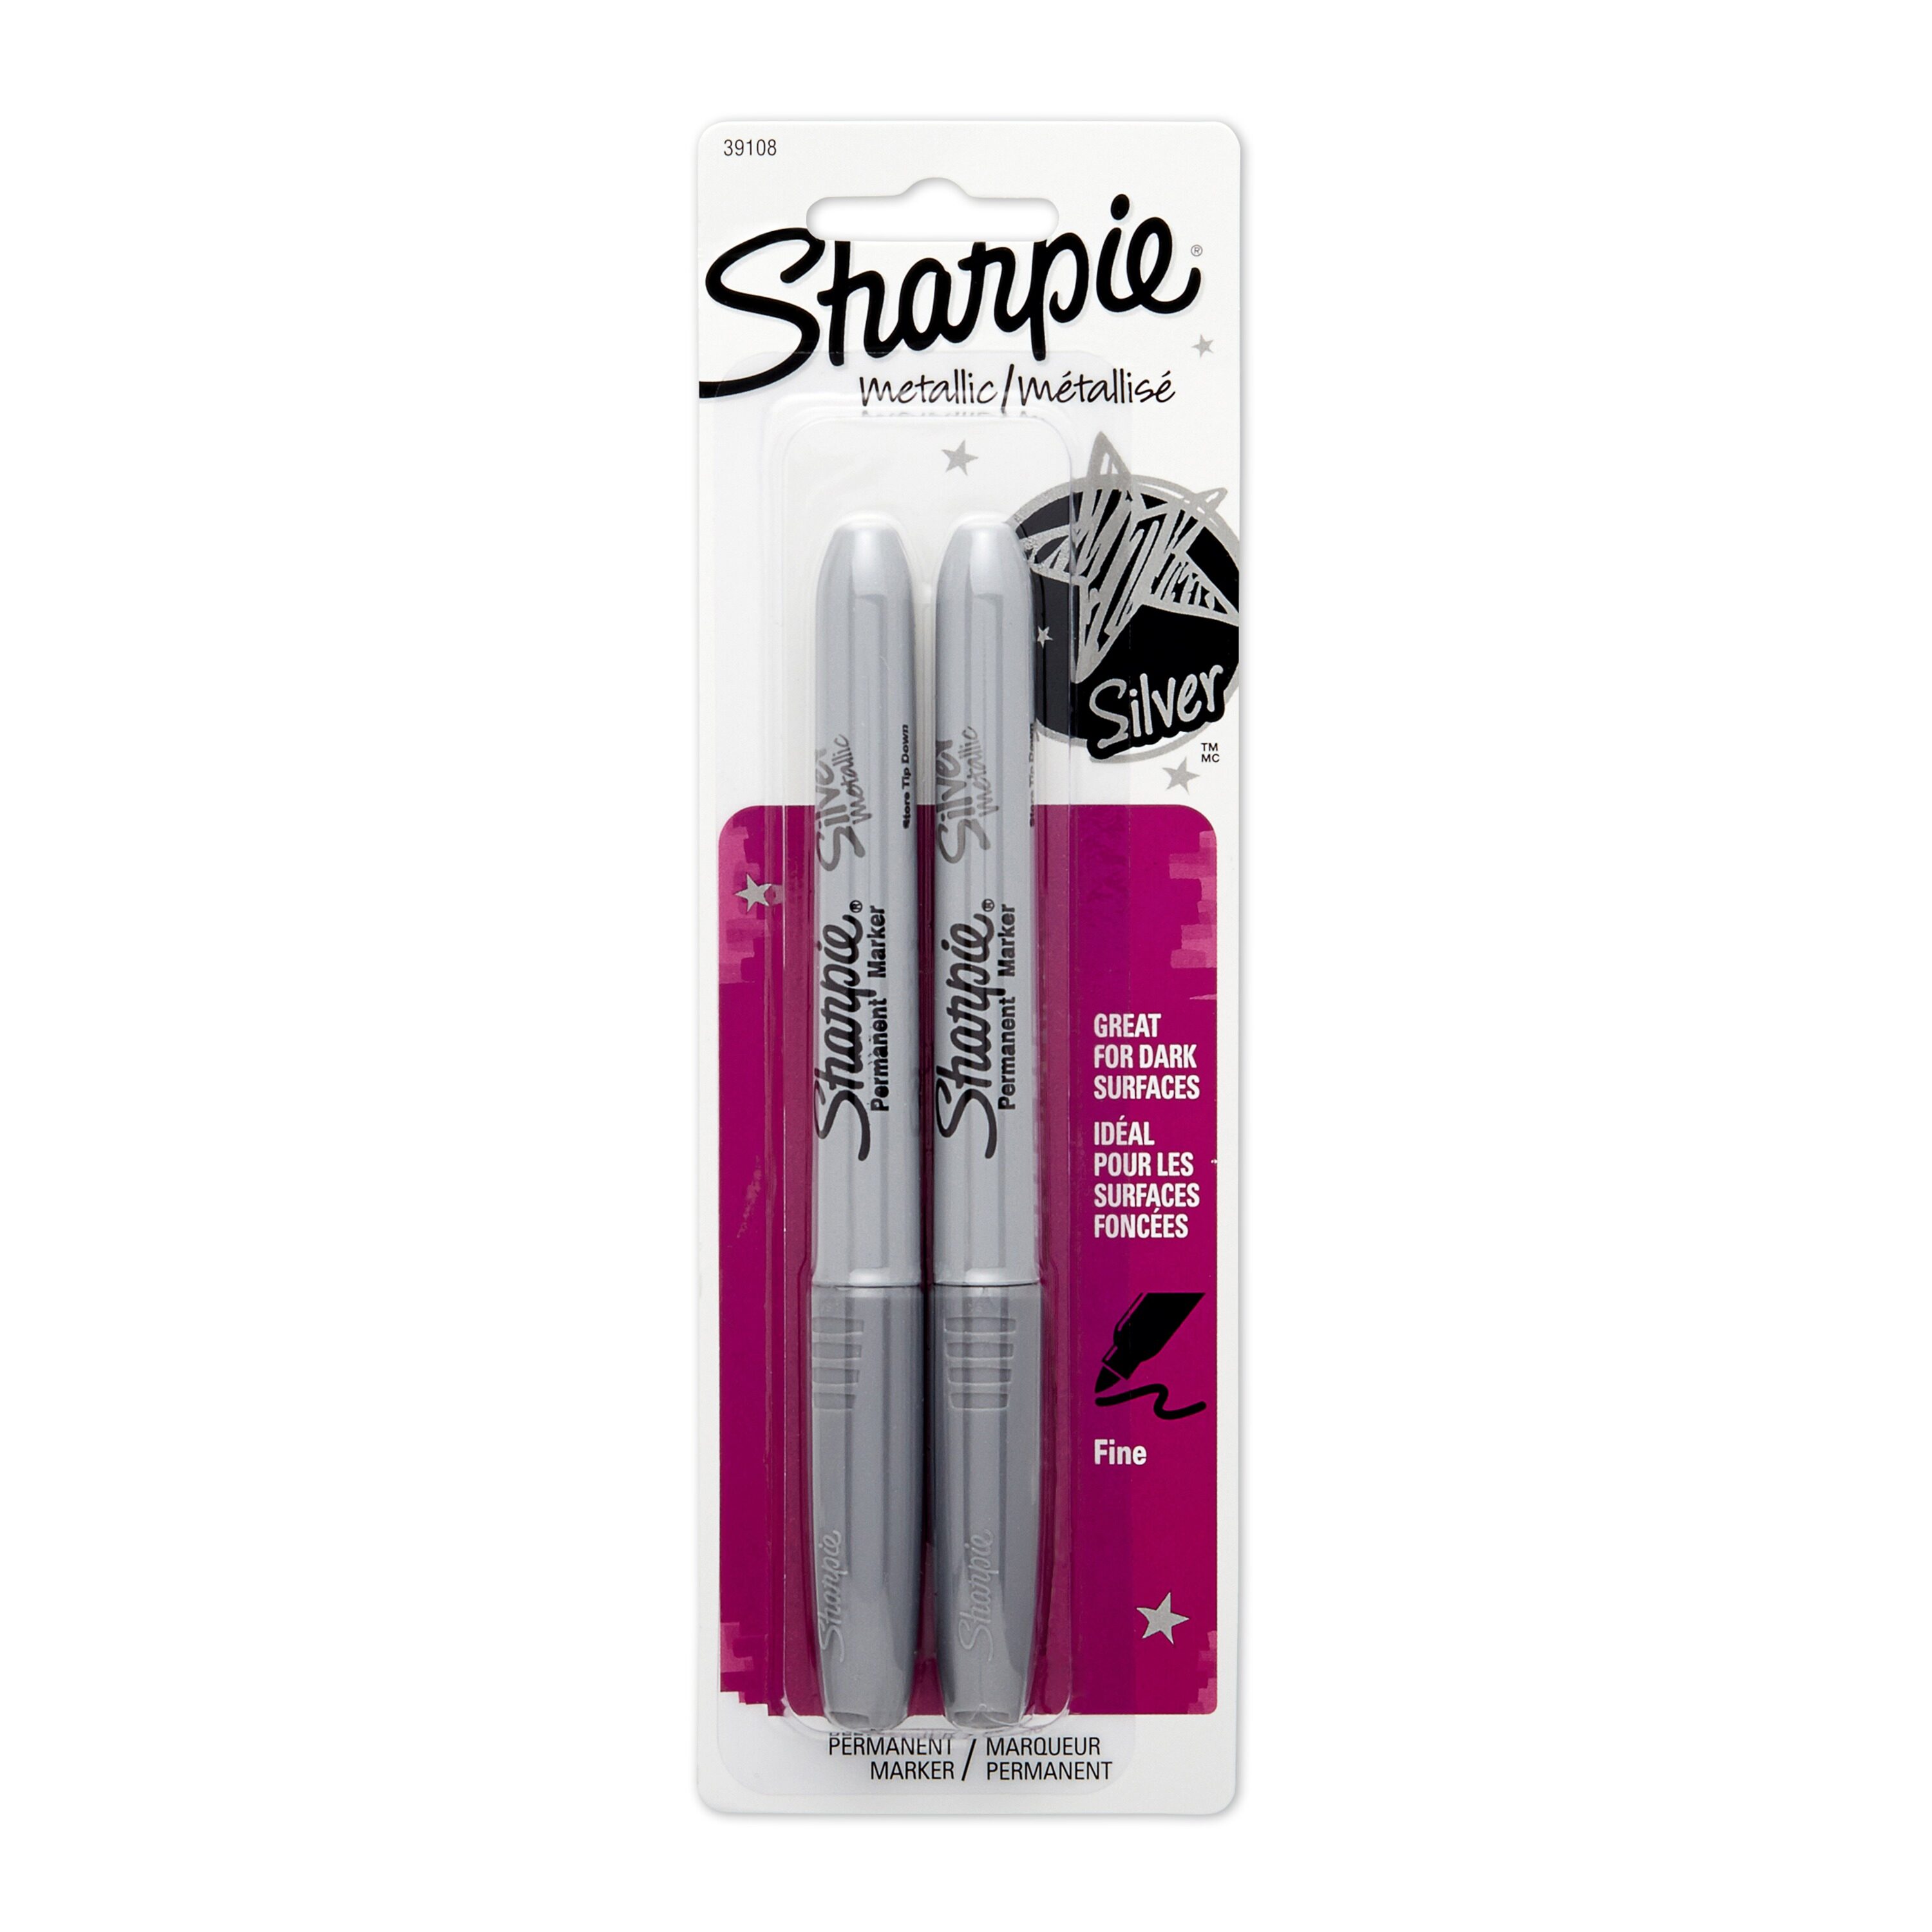 Sharpie Metallic 2-Pack Fine Point Silver Permanent Marker in the